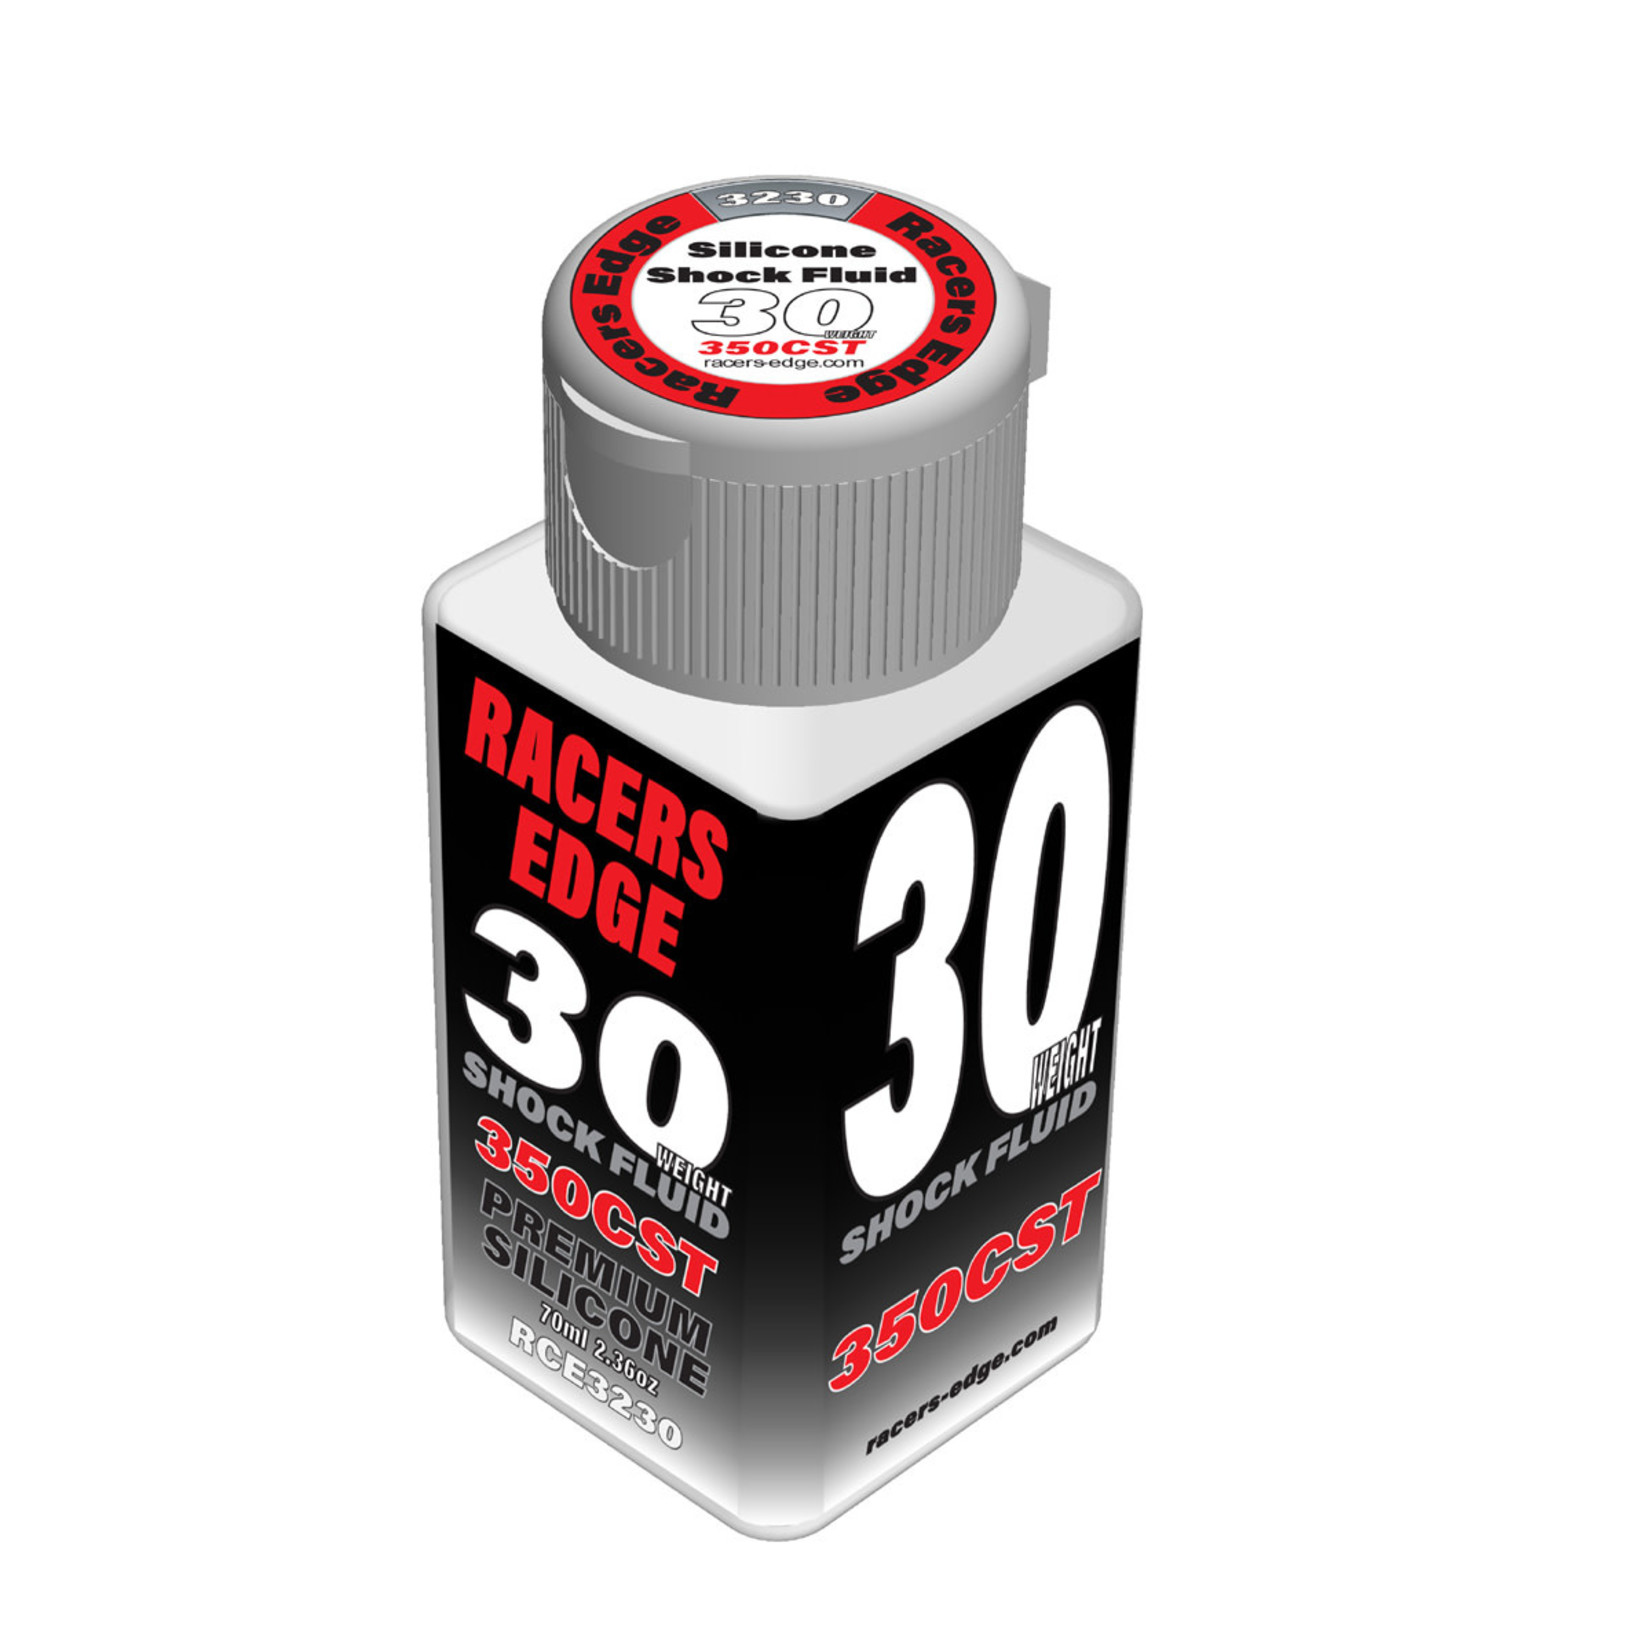 Racers Edge 30 Weight, 350cSt, 70ml 2.36oz Pure Silicone Shock Oil